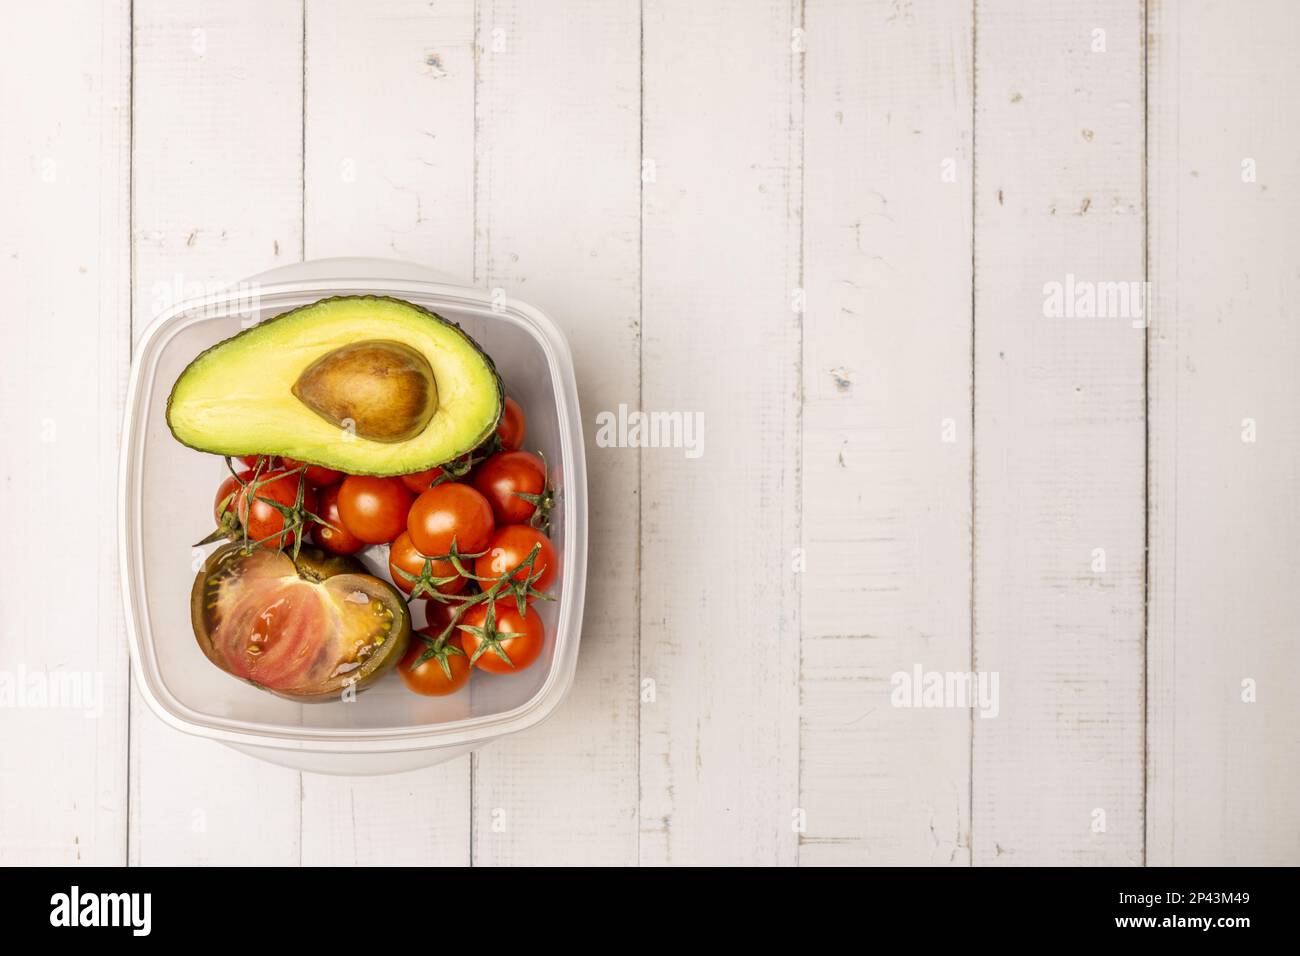 A plastic container for use in the fridge with tomatoes and avocados for salad on a white table Stock Photo